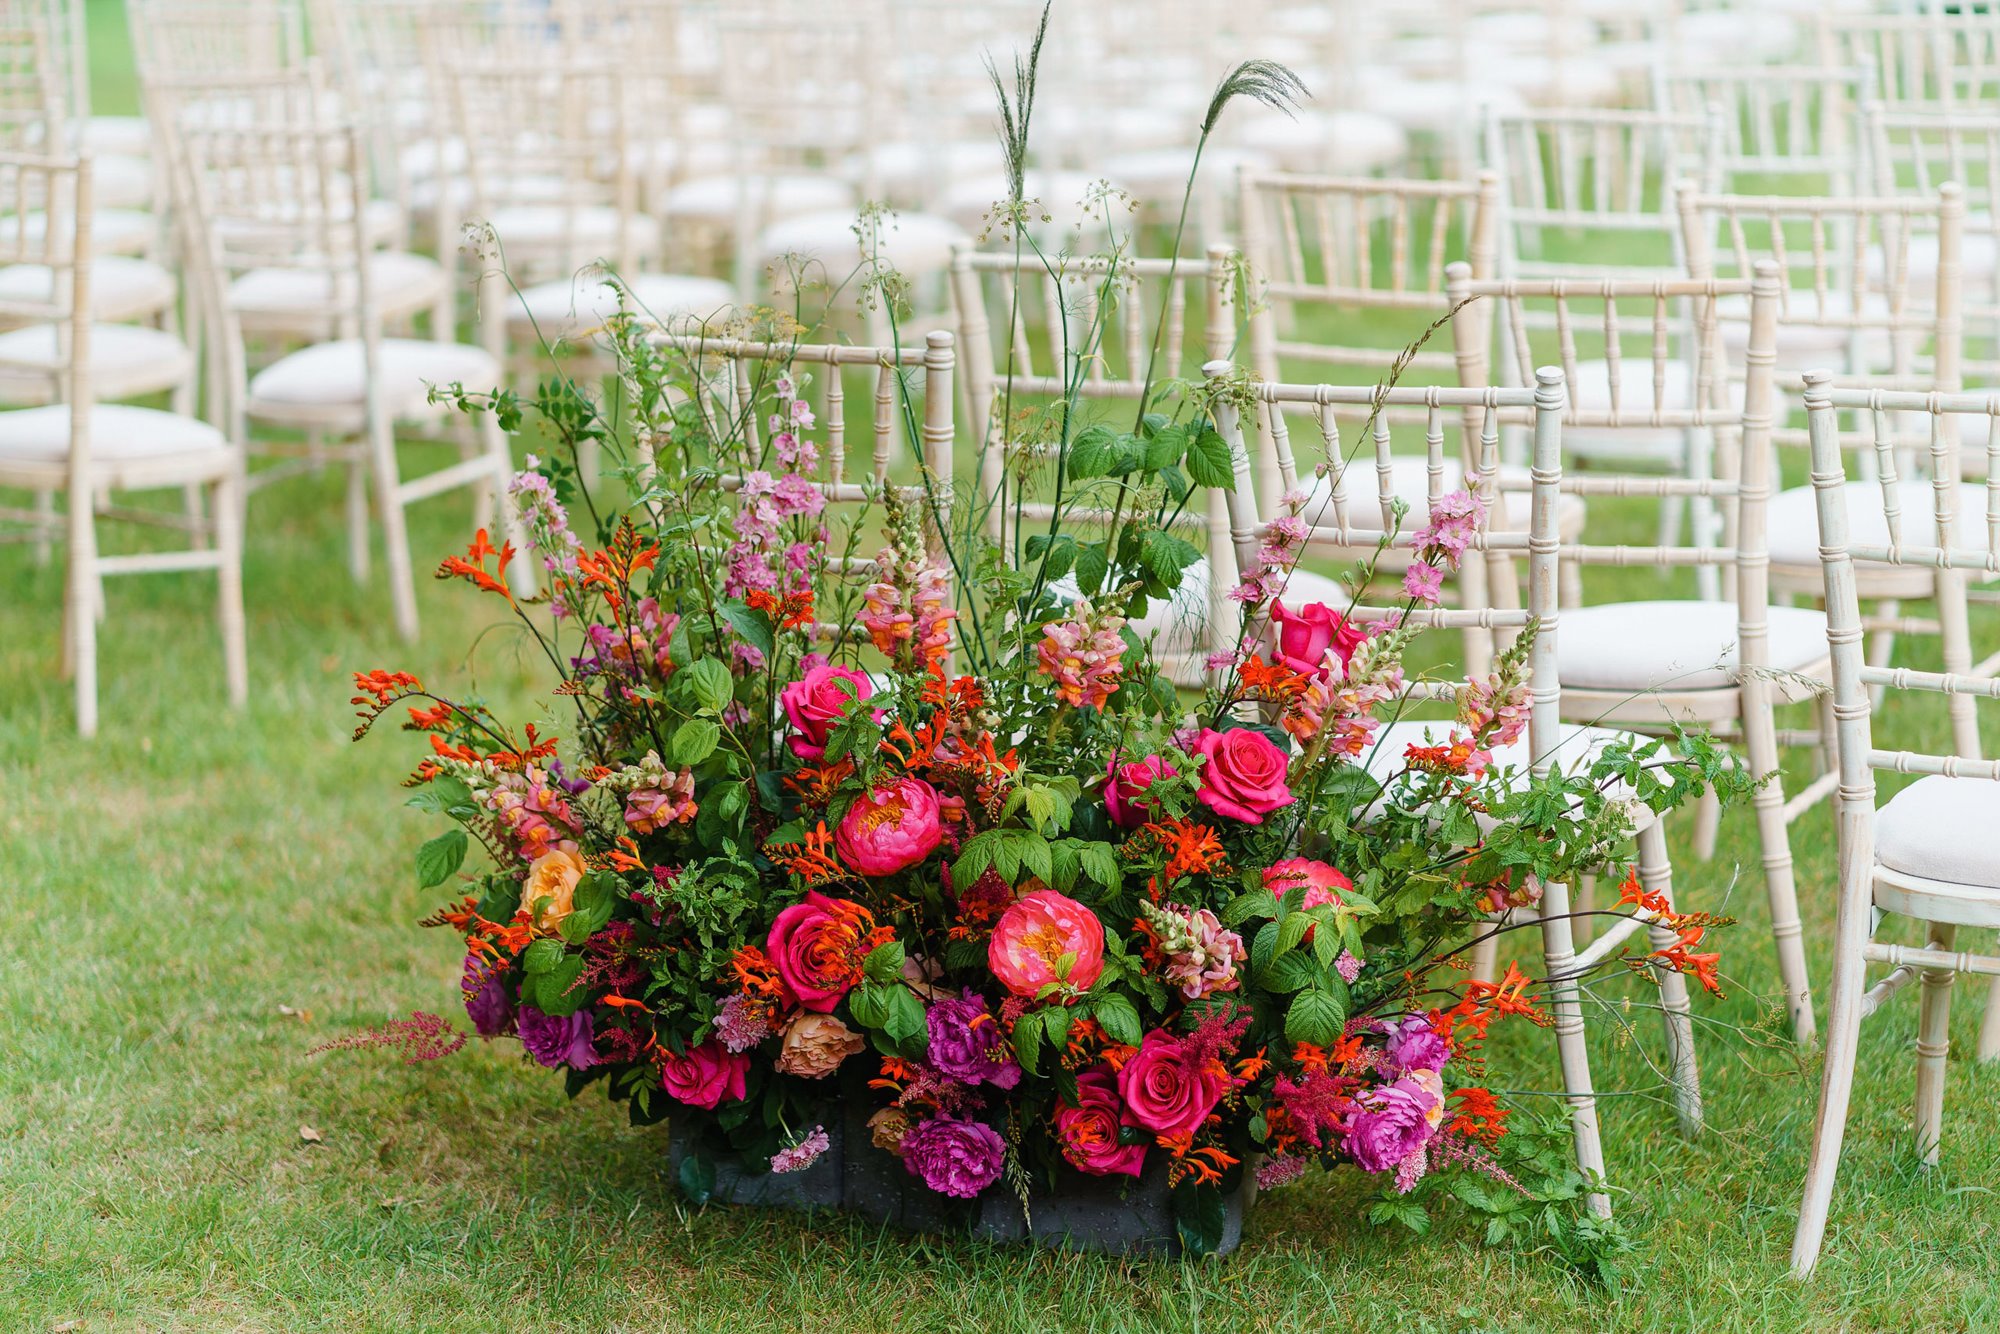 Pink and red flowers at an outdoor wedding ceremony on lovely green grass